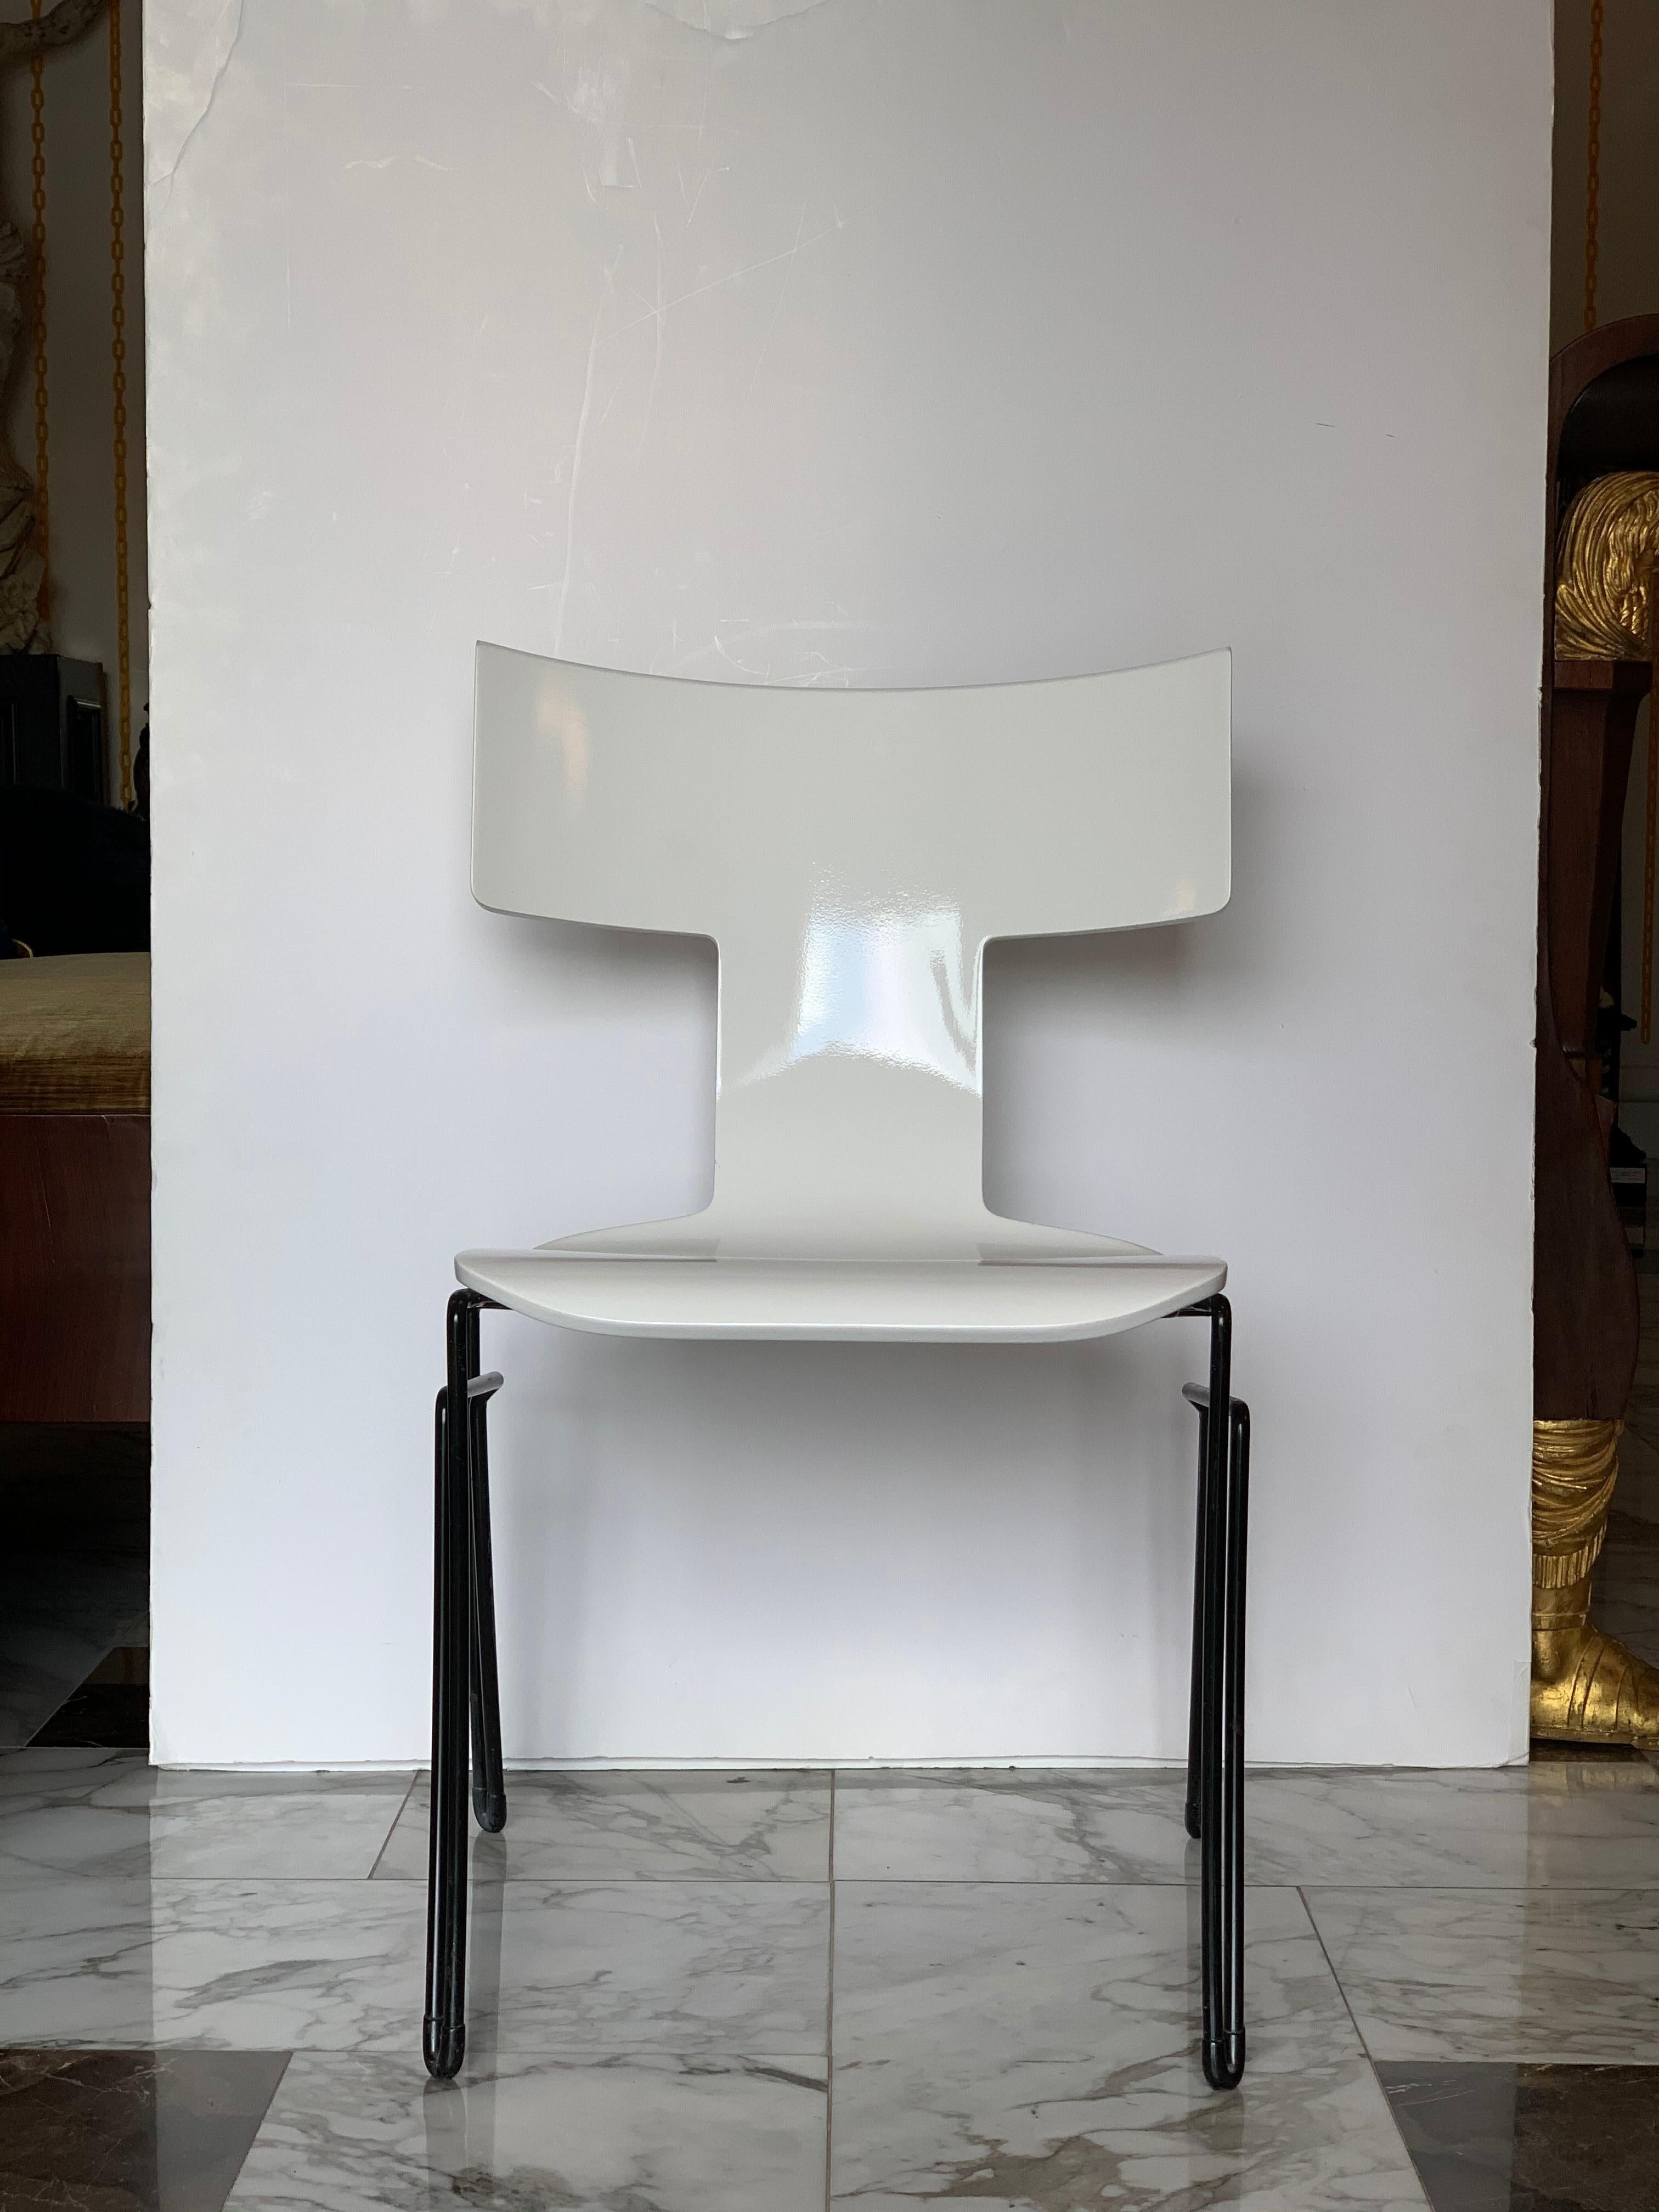 Klismos-style Anziano chairs, designed by John Hutton for Donghia, circa 1989. Vintage restored bright white molded beechwood seats with black powder-coated tubular steel frames and original black rubber floor protectors.
With its combination of